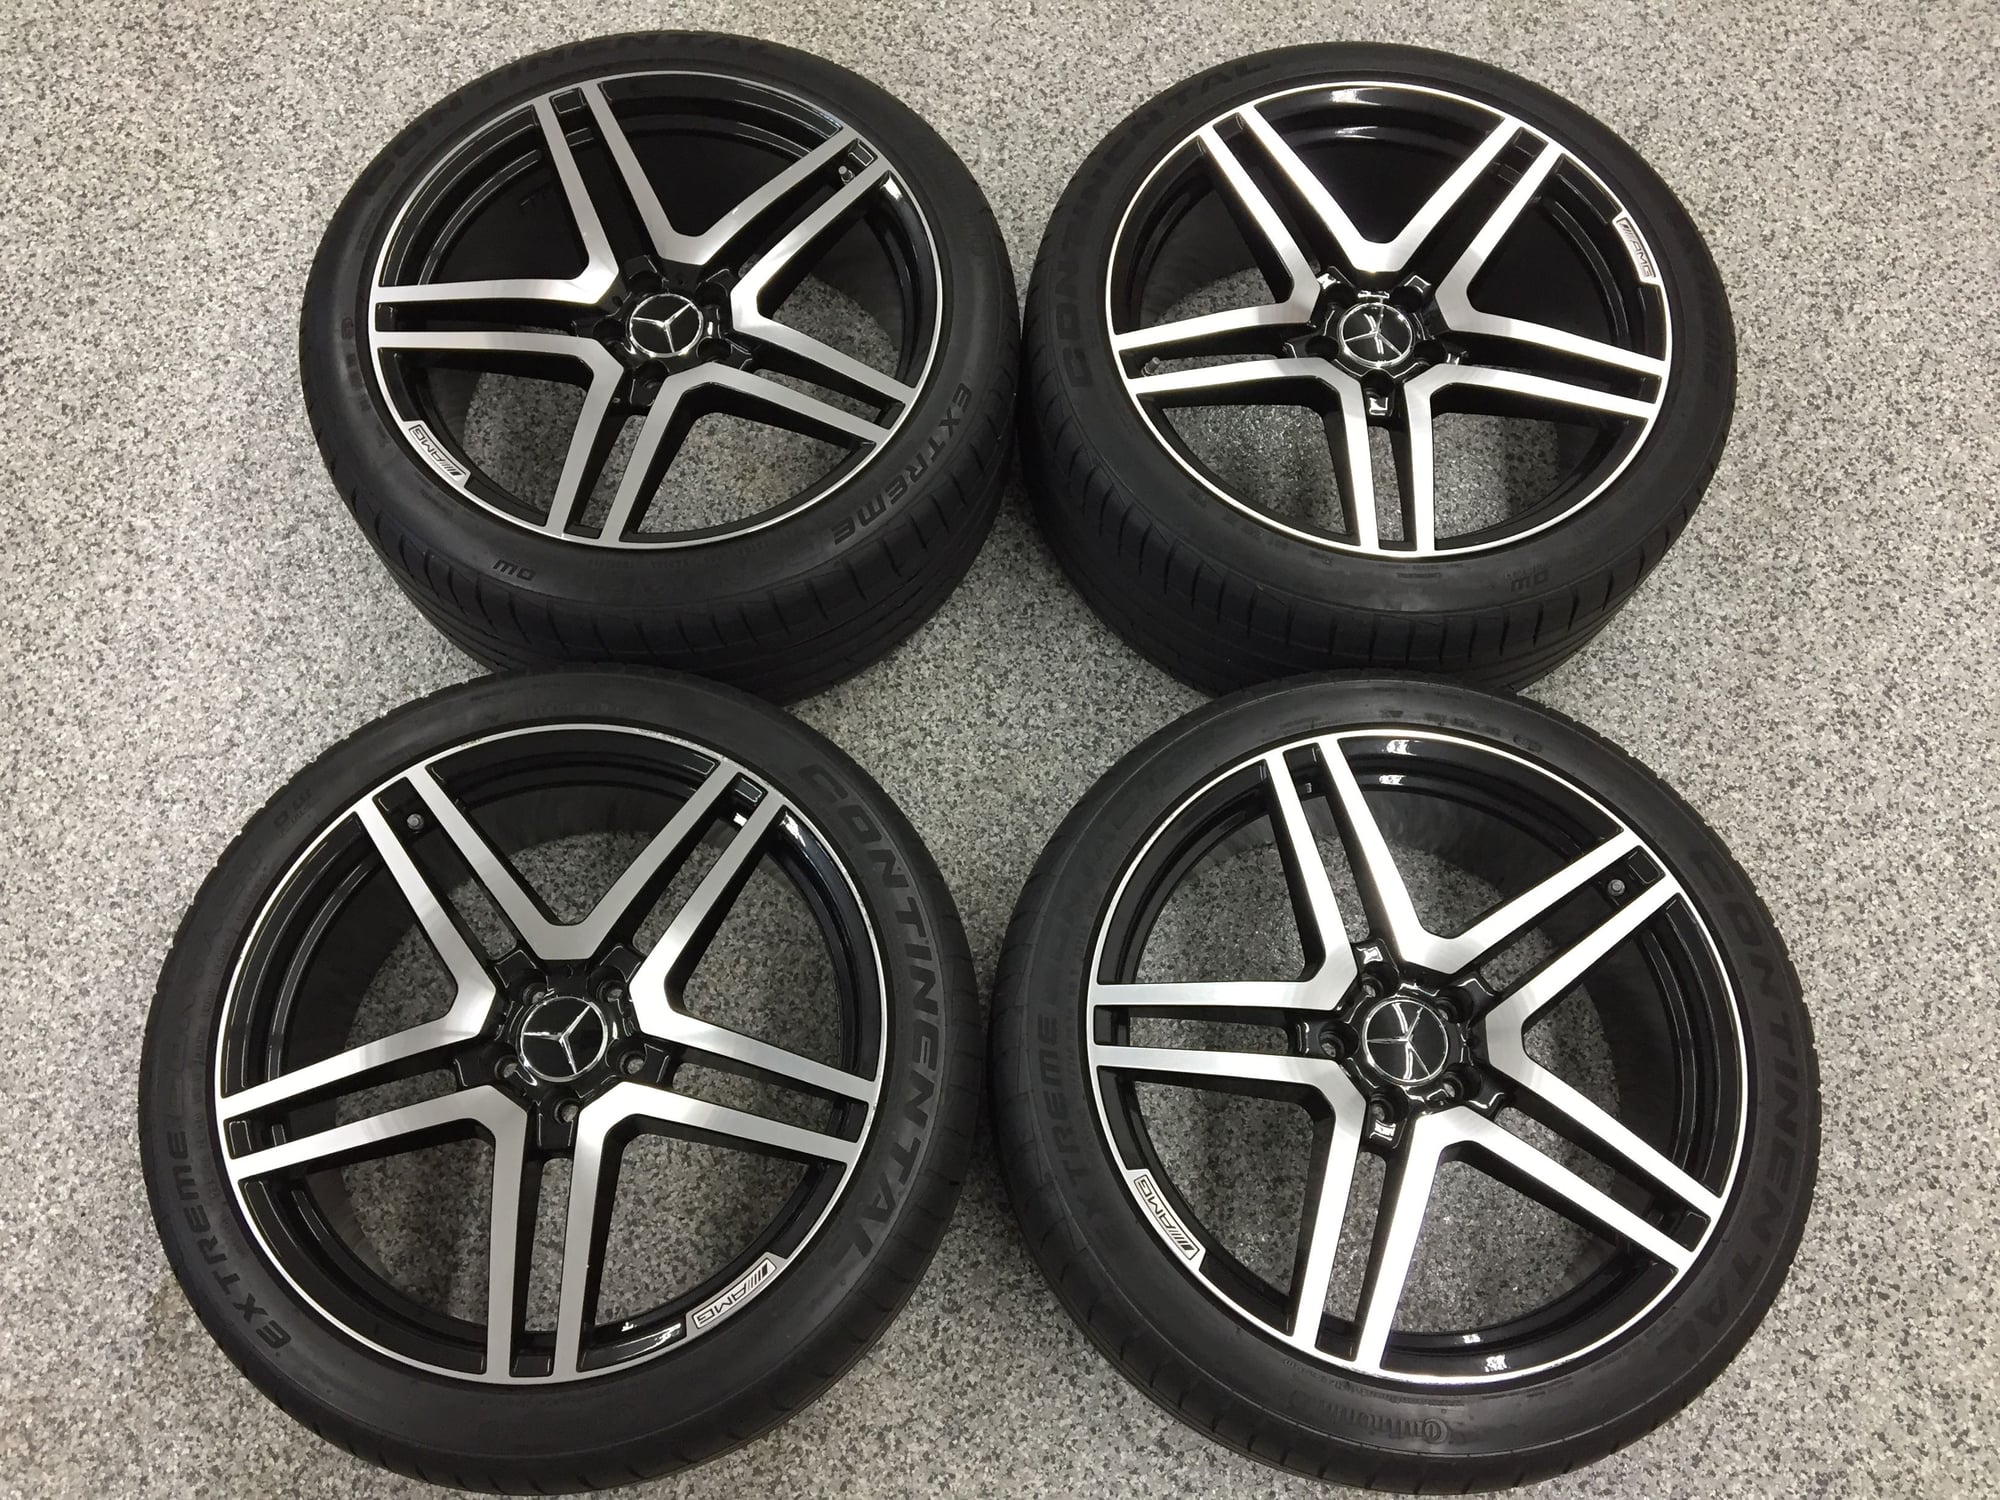 Wheels and Tires/Axles - 20" AMG Style non OE wheels with Conti Extreme DW tires - Used - Bensenville, IL 60106, United States